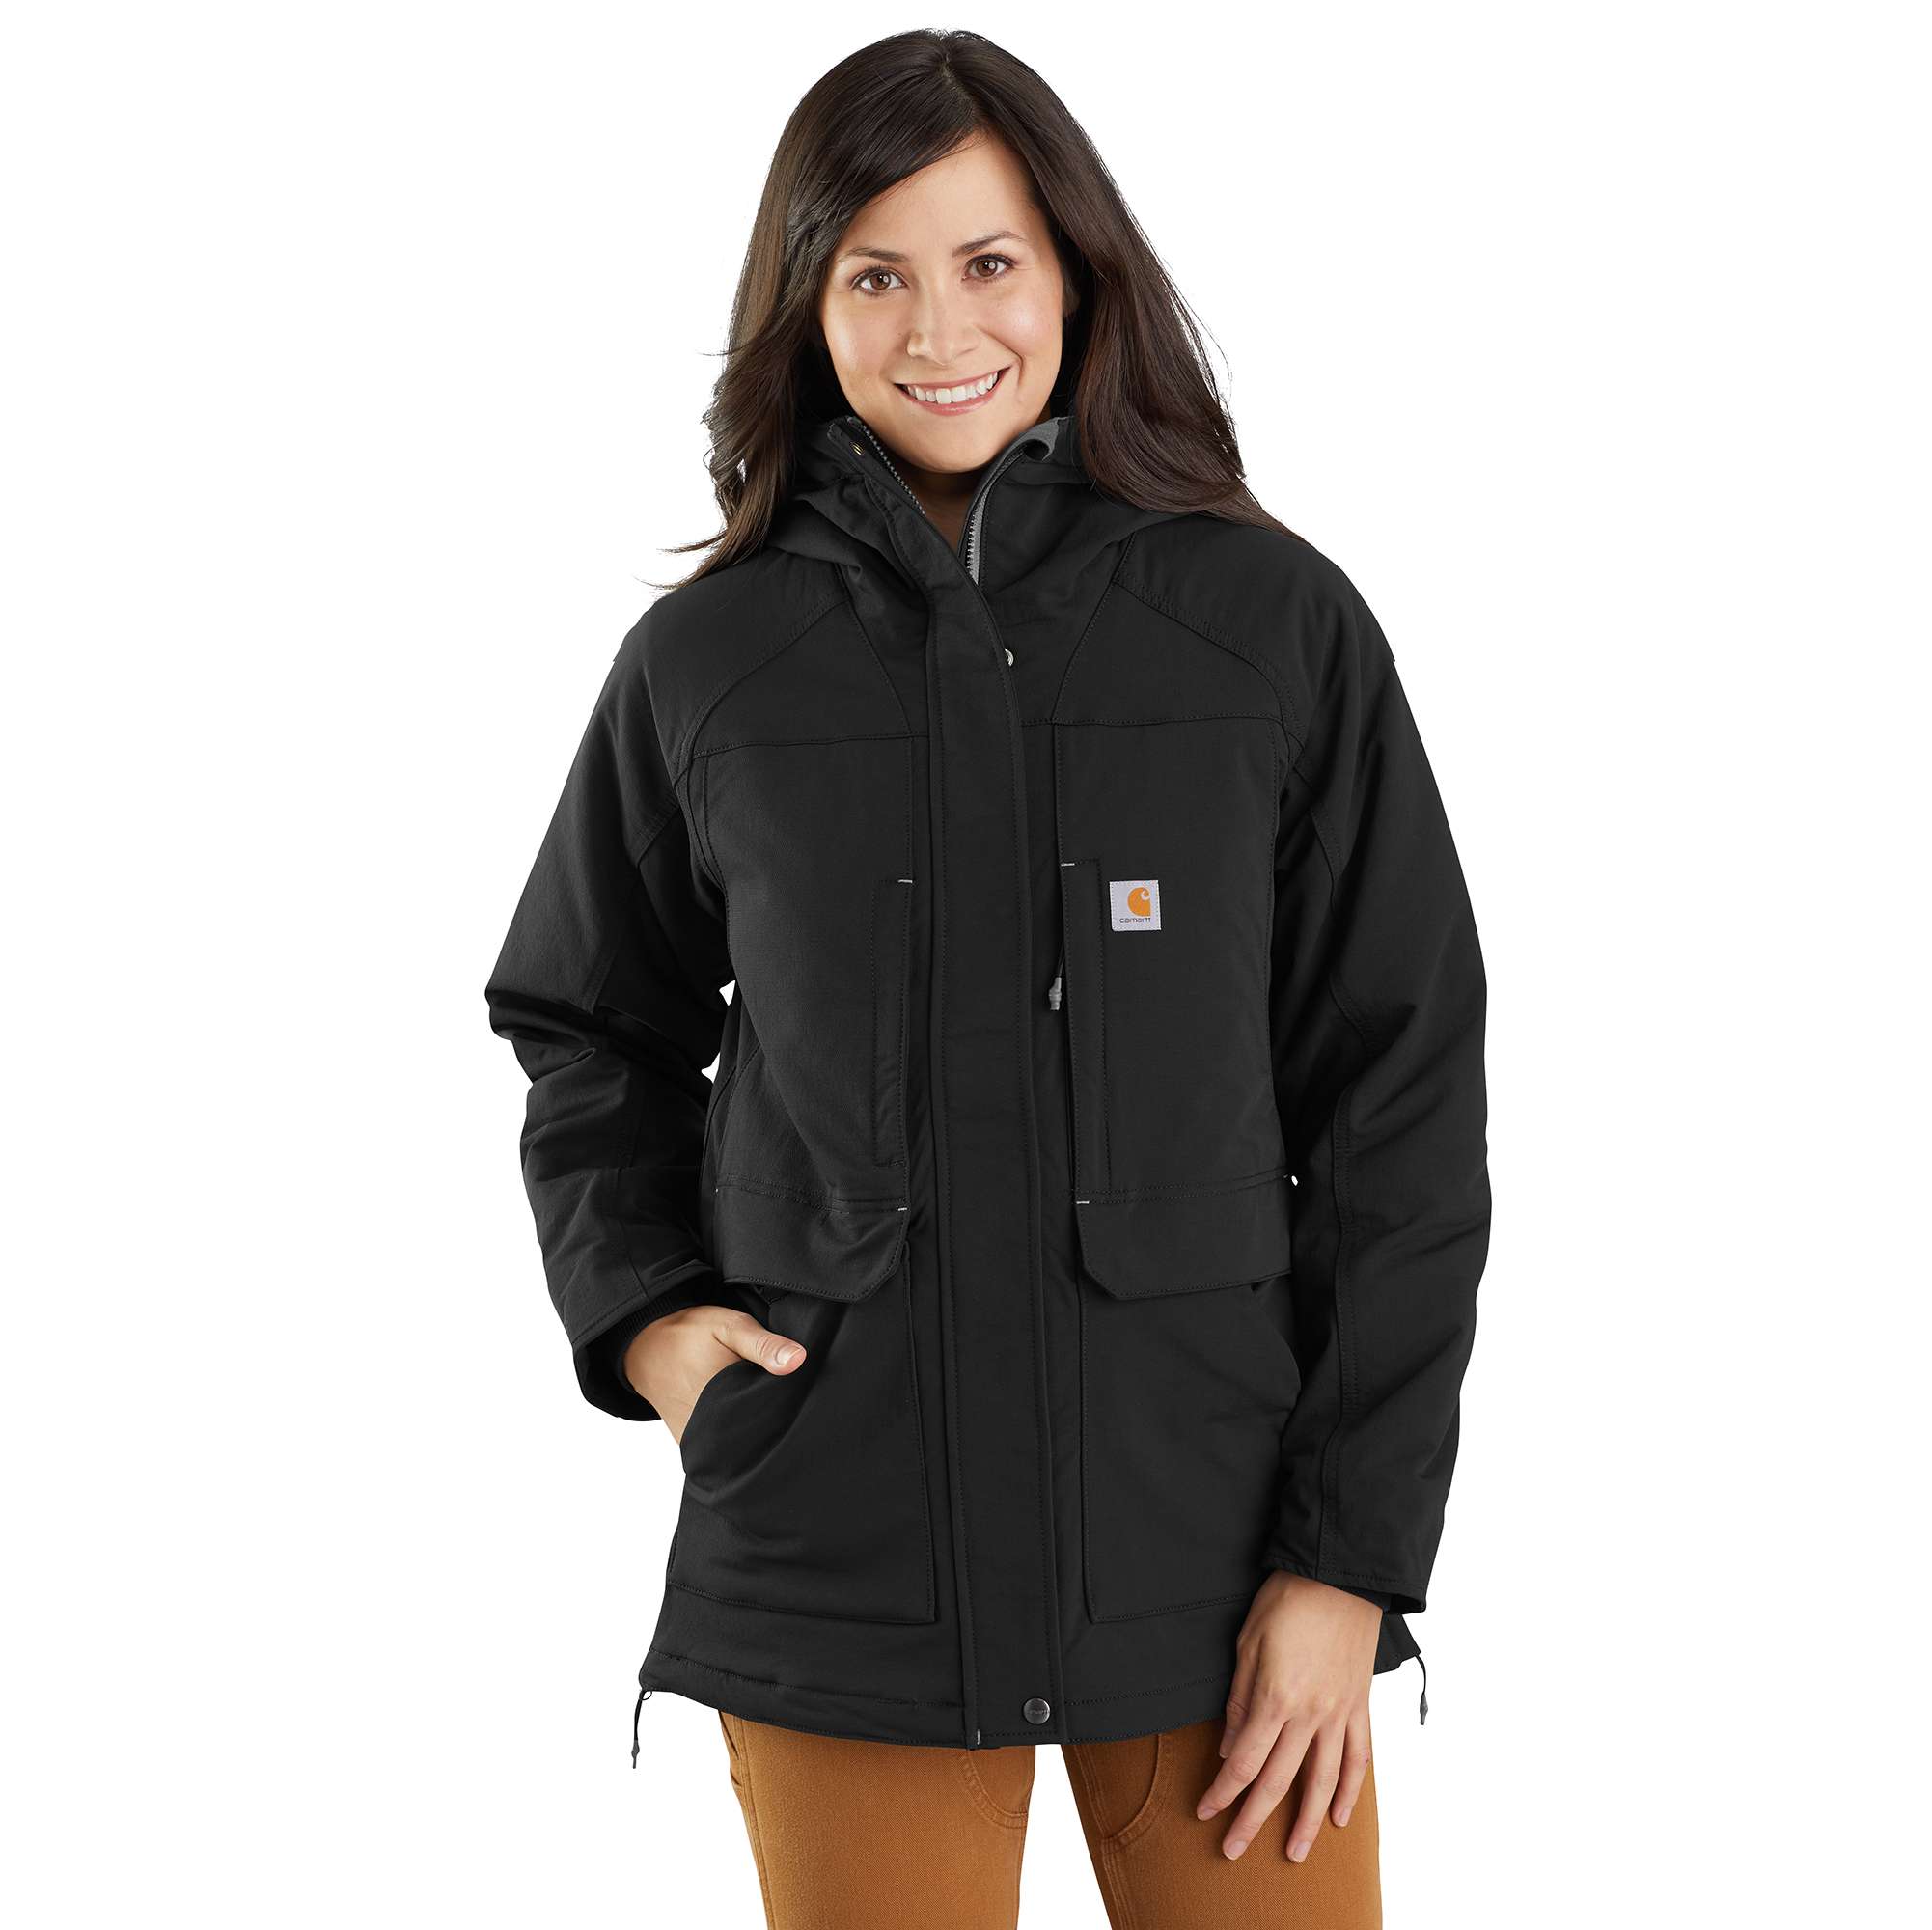 Women's Super Dux™ Tech Jacket - Relaxed Fit - 4 Extreme Warmth Rating